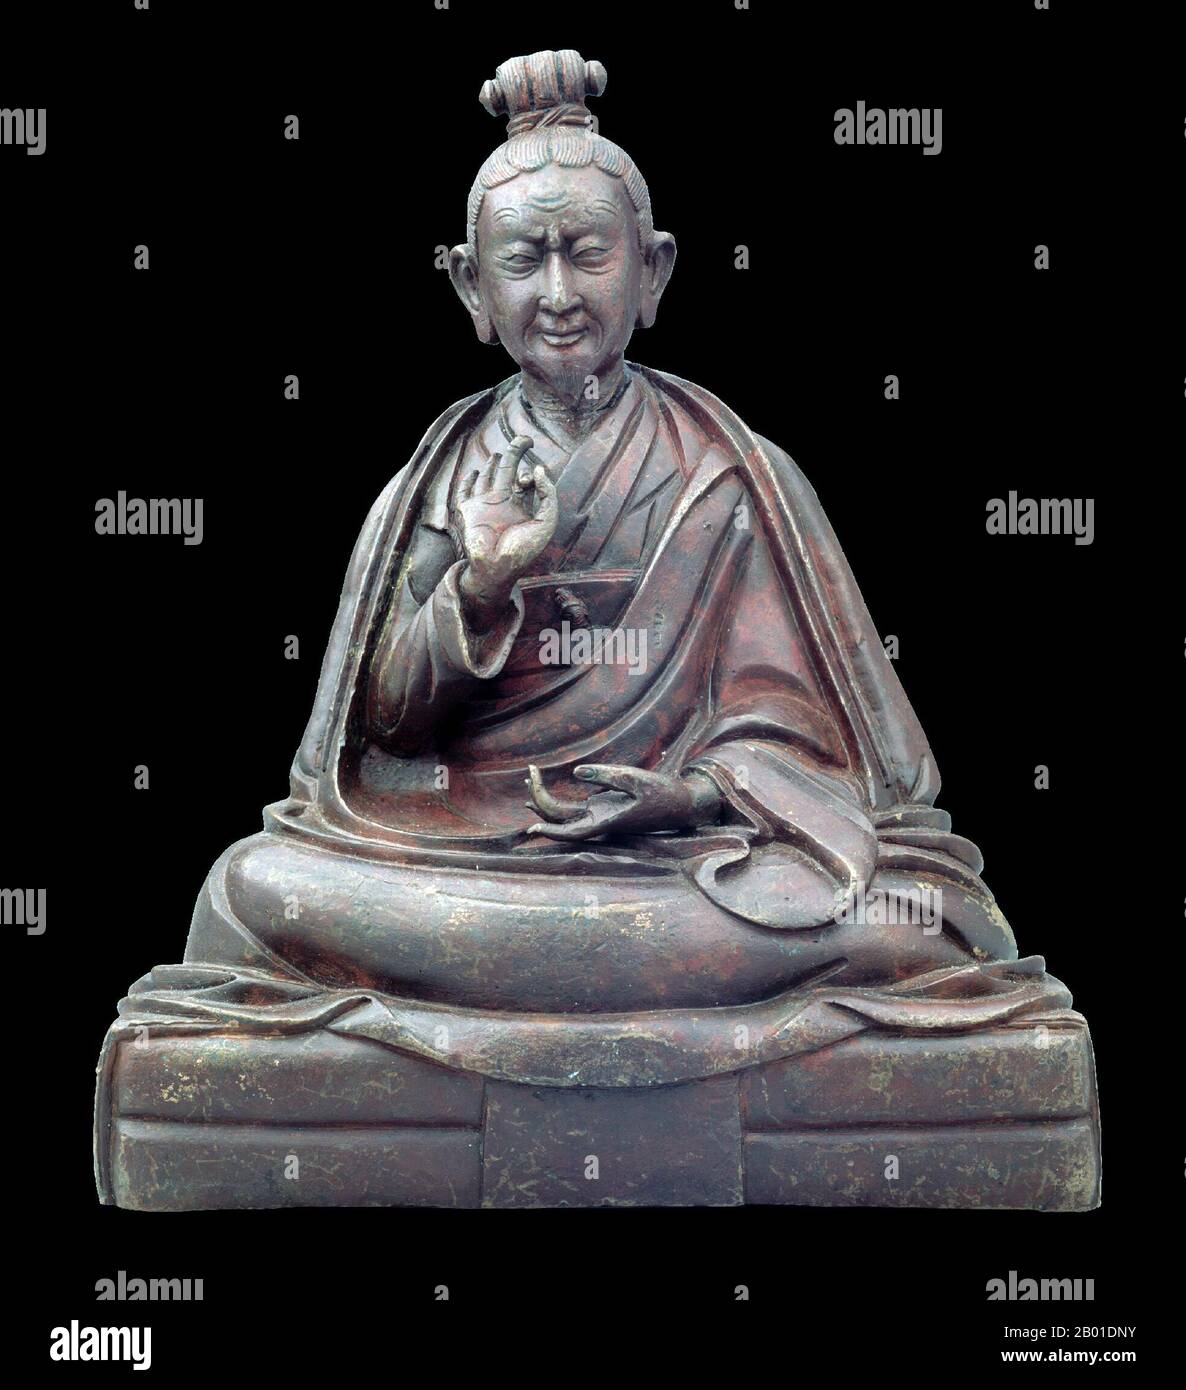 China/Tibet: Jigme Lingpa (1729-1798), Buddhist sage and discoverer of ancient texts. Bronze statuette, c, 1798.  Jigme Lingpa was the promulgator of the Longchen Nyingthik, the Heart Essence teachings of Longchenpa, from whom, according to tradition, he received a vision in which the teachings were revealed.  The Longchen Nyingthik eventually became the most famous and widely practiced cycle of Dzogchen teachings. Namkha'i and Shane (1999) affirm that Jigme Lingpa also wrote a treatise on the spiritual and medicinal usage of crystals and gems of principal importance. Stock Photo